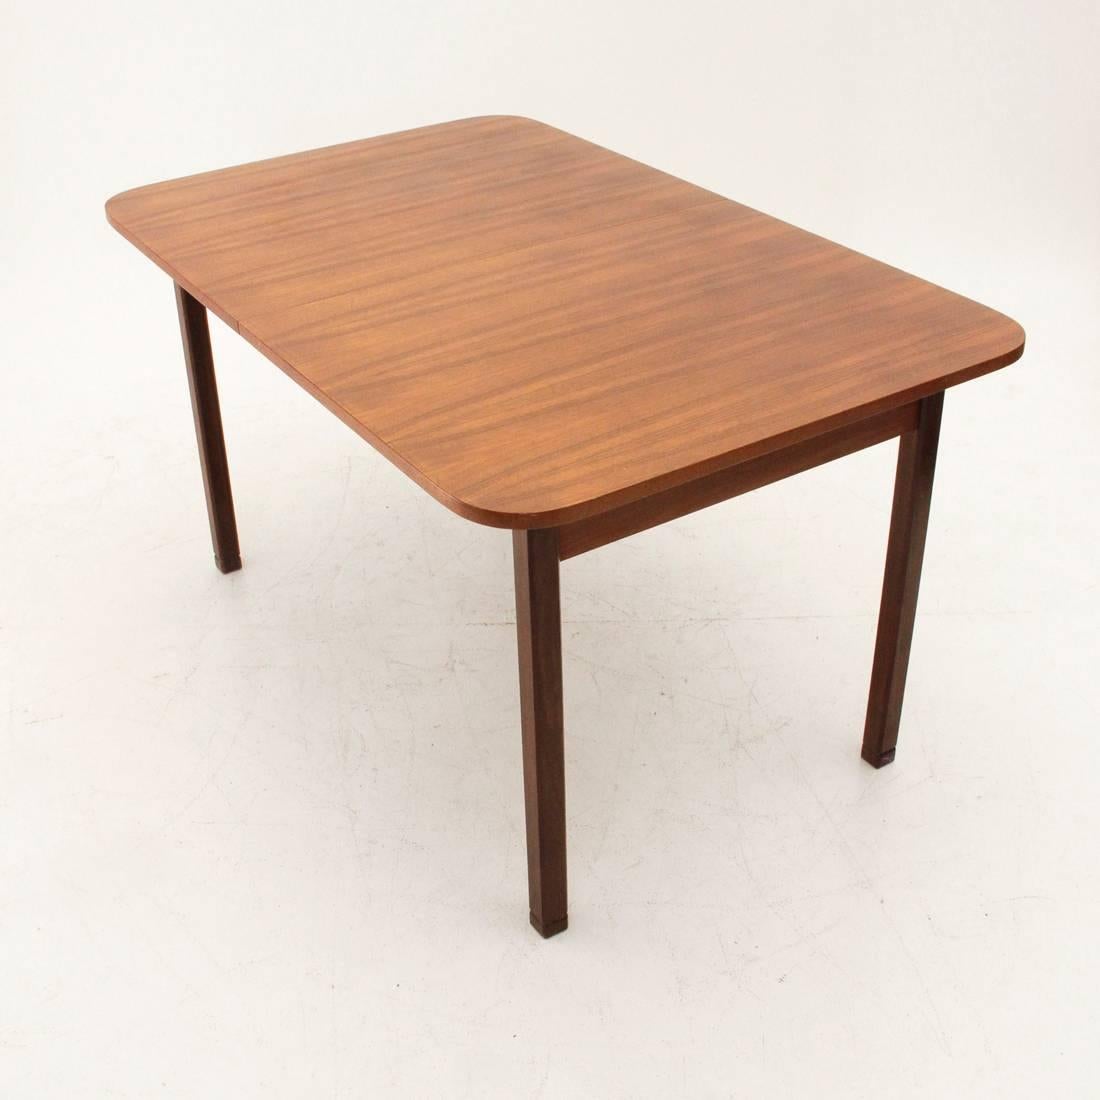 Table of Italian production of the 1960s.
Teak structure.
Teak veneered top with central extensions.
Width when extended 182 cm.